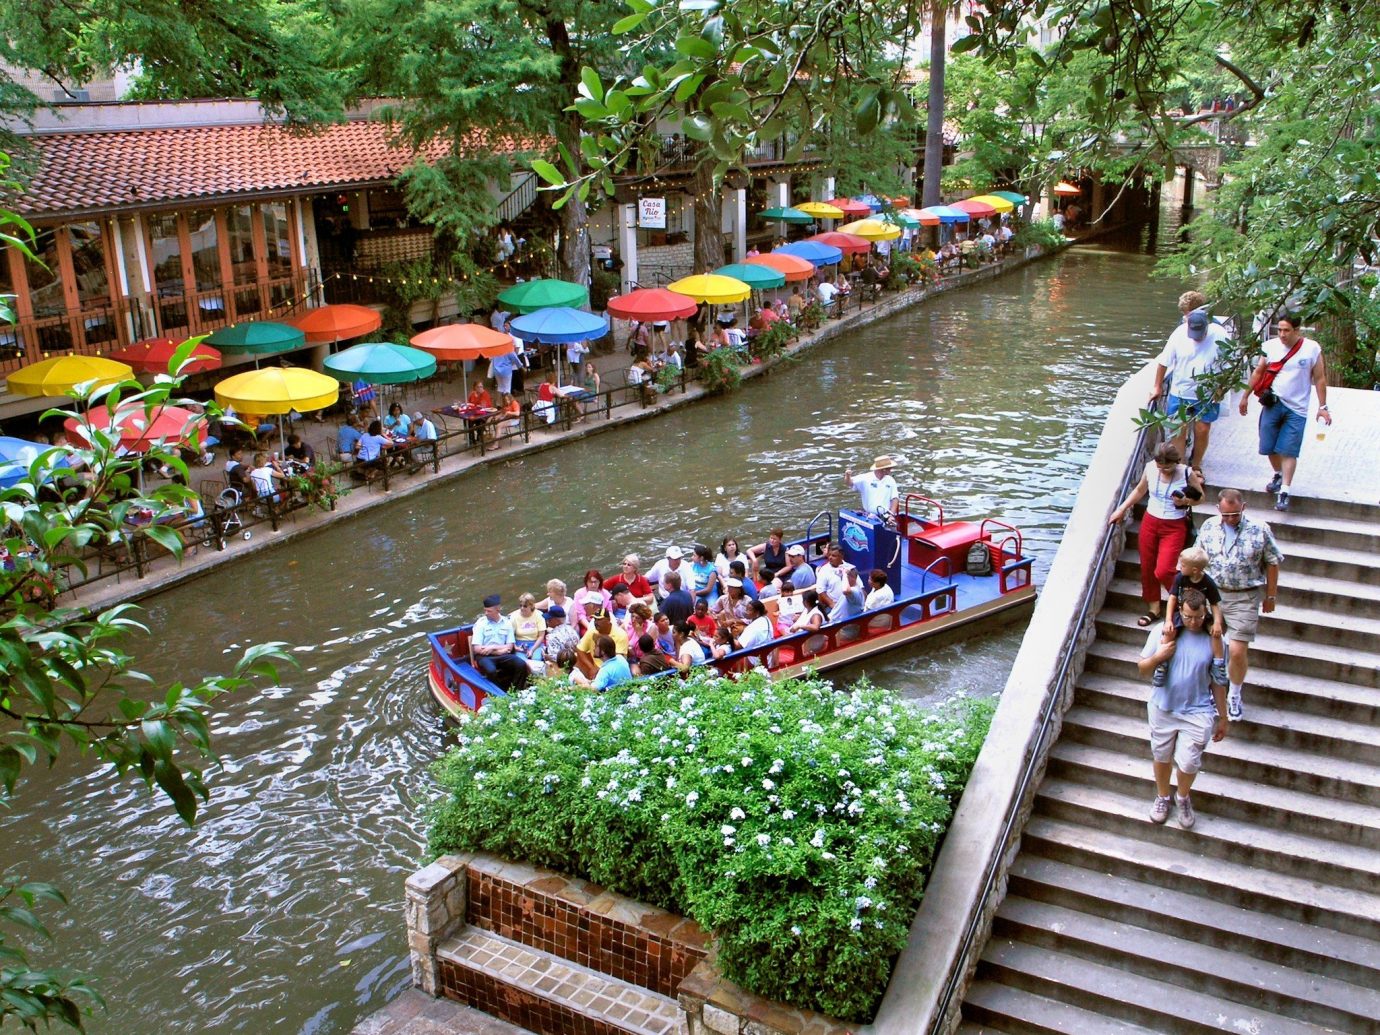 Trip Ideas tree waterway outdoor water Canal water transportation Rowing plant leisure Boat boating watercourse River watercraft rowing vehicle recreation tourism vegetable landscape City pond several